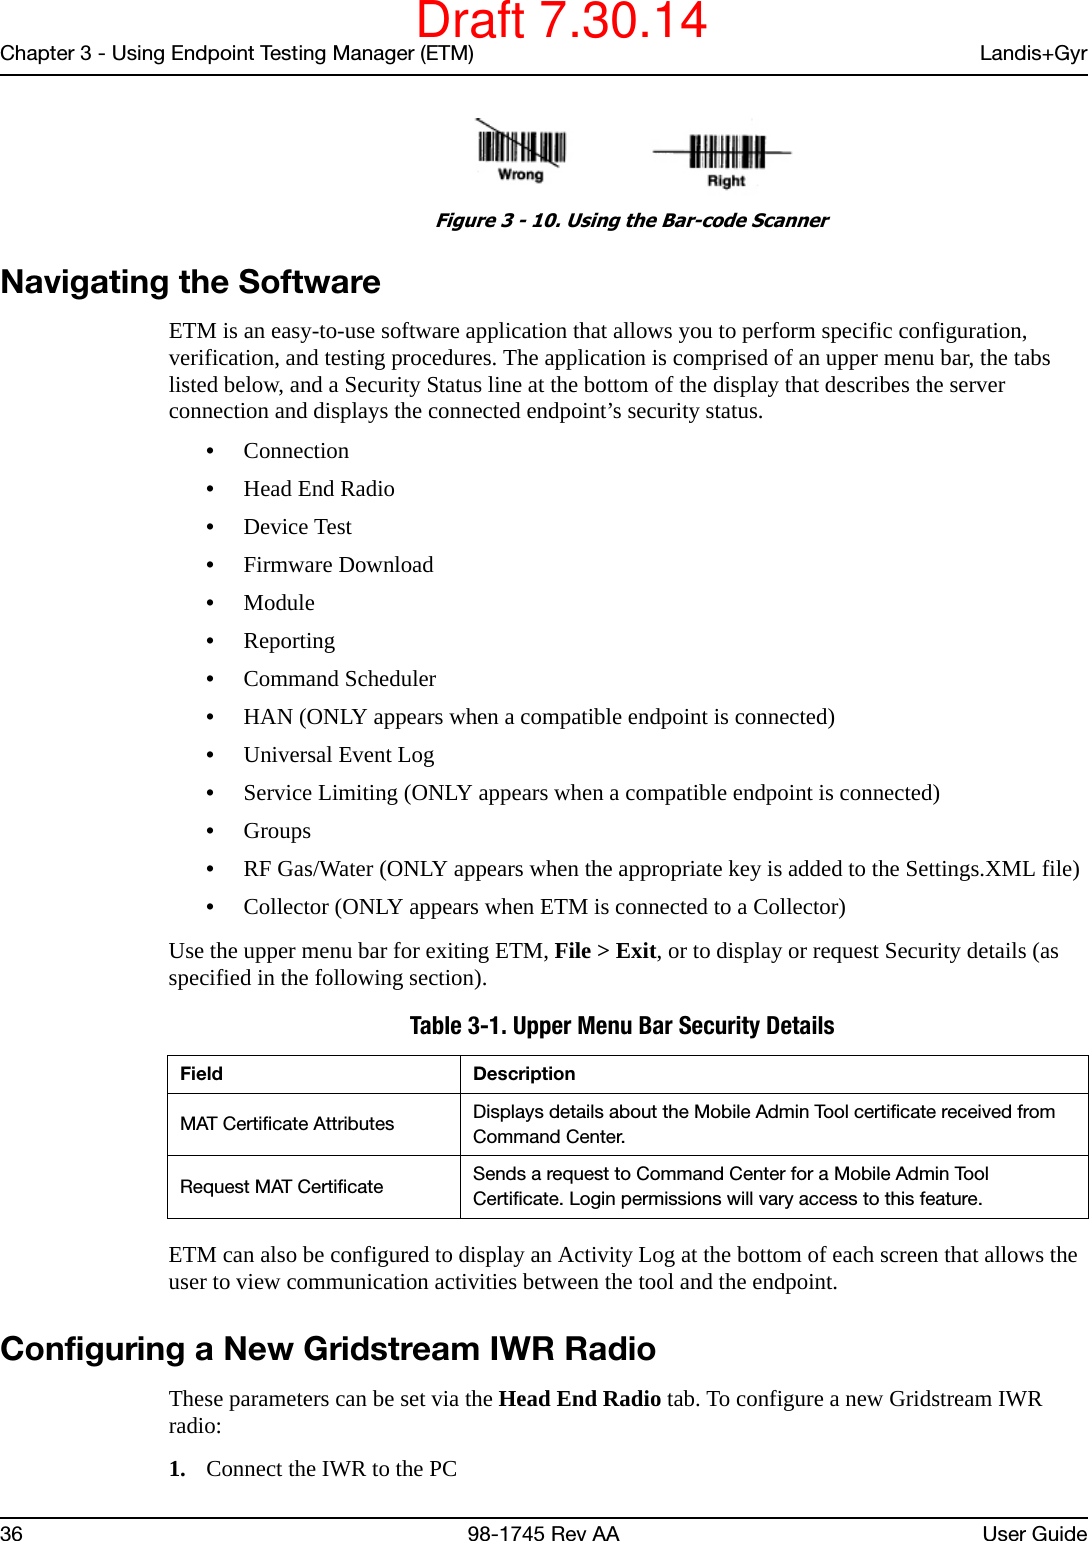 Chapter 3 - Using Endpoint Testing Manager (ETM) Landis+Gyr36 98-1745 Rev AA User Guide Figure 3 - 10. Using the Bar-code ScannerNavigating the SoftwareETM is an easy-to-use software application that allows you to perform specific configuration, verification, and testing procedures. The application is comprised of an upper menu bar, the tabs listed below, and a Security Status line at the bottom of the display that describes the server connection and displays the connected endpoint’s security status.•Connection•Head End Radio•Device Test•Firmware Download•Module•Reporting•Command Scheduler•HAN (ONLY appears when a compatible endpoint is connected)•Universal Event Log•Service Limiting (ONLY appears when a compatible endpoint is connected)•Groups•RF Gas/Water (ONLY appears when the appropriate key is added to the Settings.XML file)•Collector (ONLY appears when ETM is connected to a Collector)Use the upper menu bar for exiting ETM, File &gt; Exit, or to display or request Security details (as specified in the following section).ETM can also be configured to display an Activity Log at the bottom of each screen that allows the user to view communication activities between the tool and the endpoint.Configuring a New Gridstream IWR RadioThese parameters can be set via the Head End Radio tab. To configure a new Gridstream IWR radio:1. Connect the IWR to the PCTable 3-1. Upper Menu Bar Security Details Field DescriptionMAT Certificate Attributes Displays details about the Mobile Admin Tool certificate received from Command Center.Request MAT Certificate Sends a request to Command Center for a Mobile Admin Tool Certificate. Login permissions will vary access to this feature.Draft 7.30.14